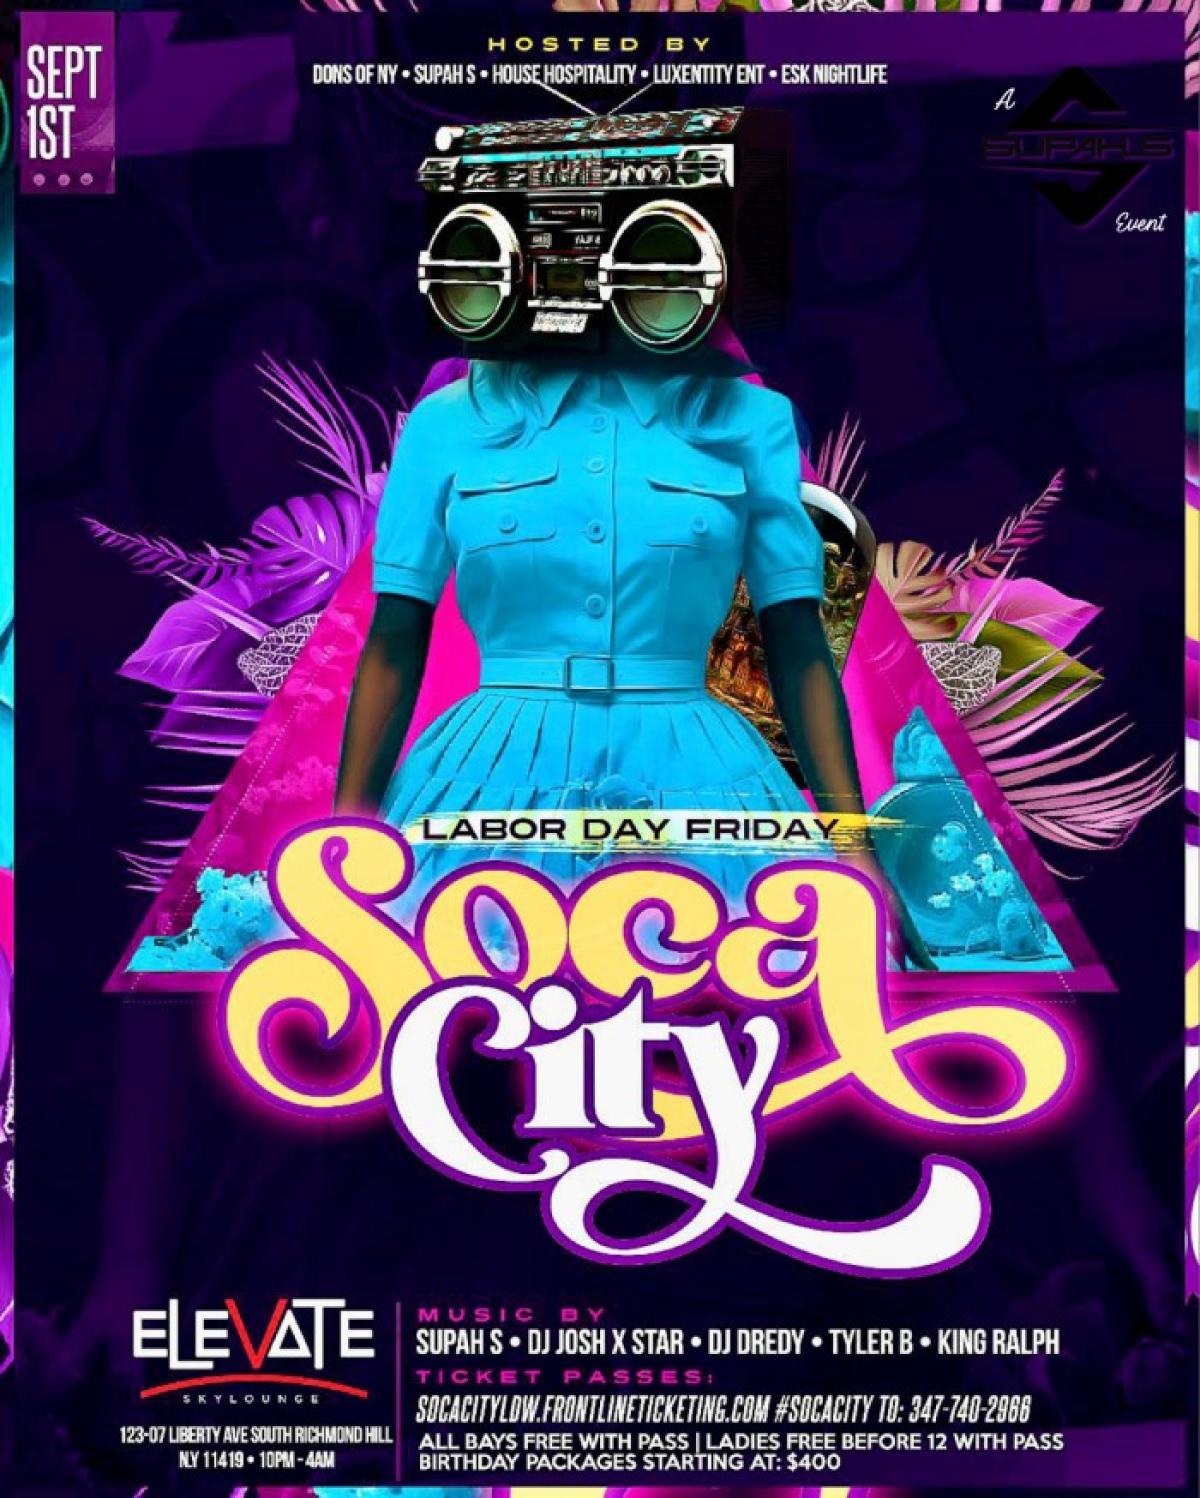 Soca City - Labor Day Friday flyer or graphic.